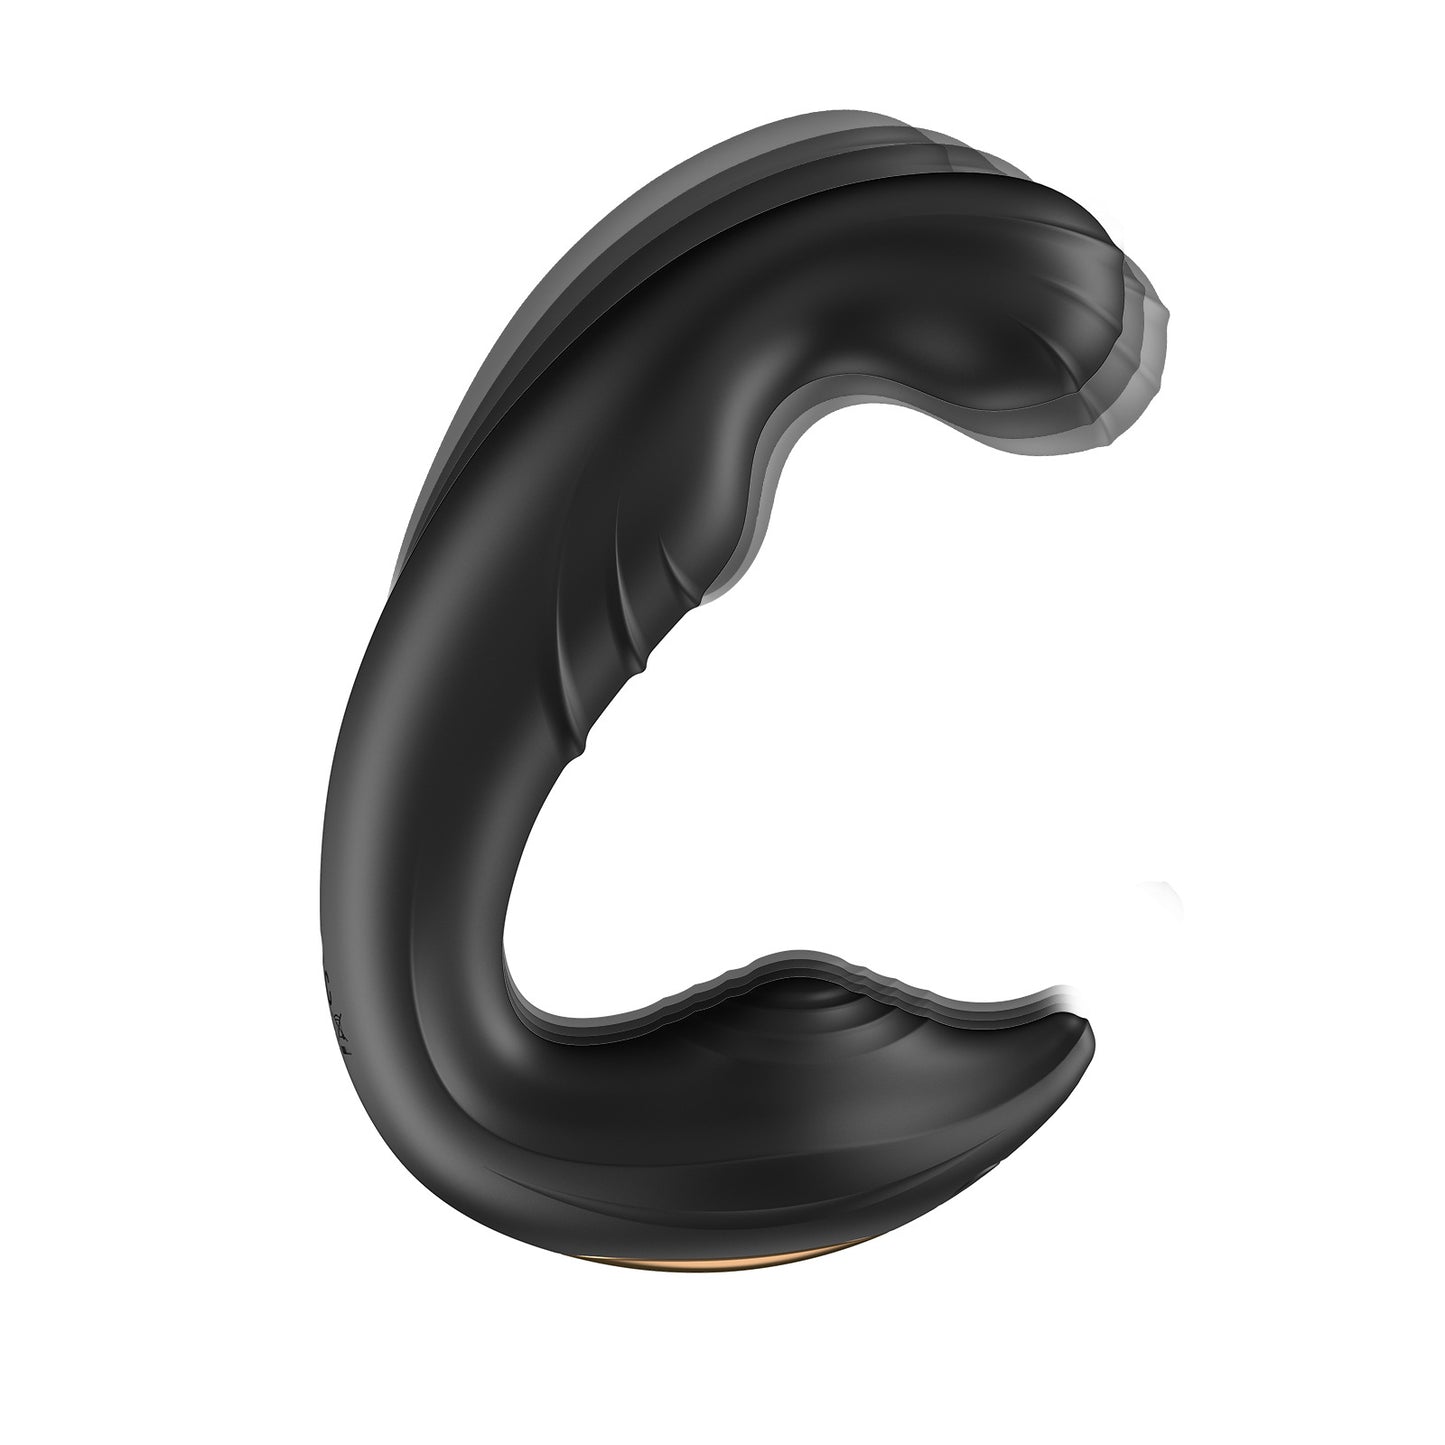 Remote Control Finger Flapping Prostate Massager - Double End Anal Clit Stimulator